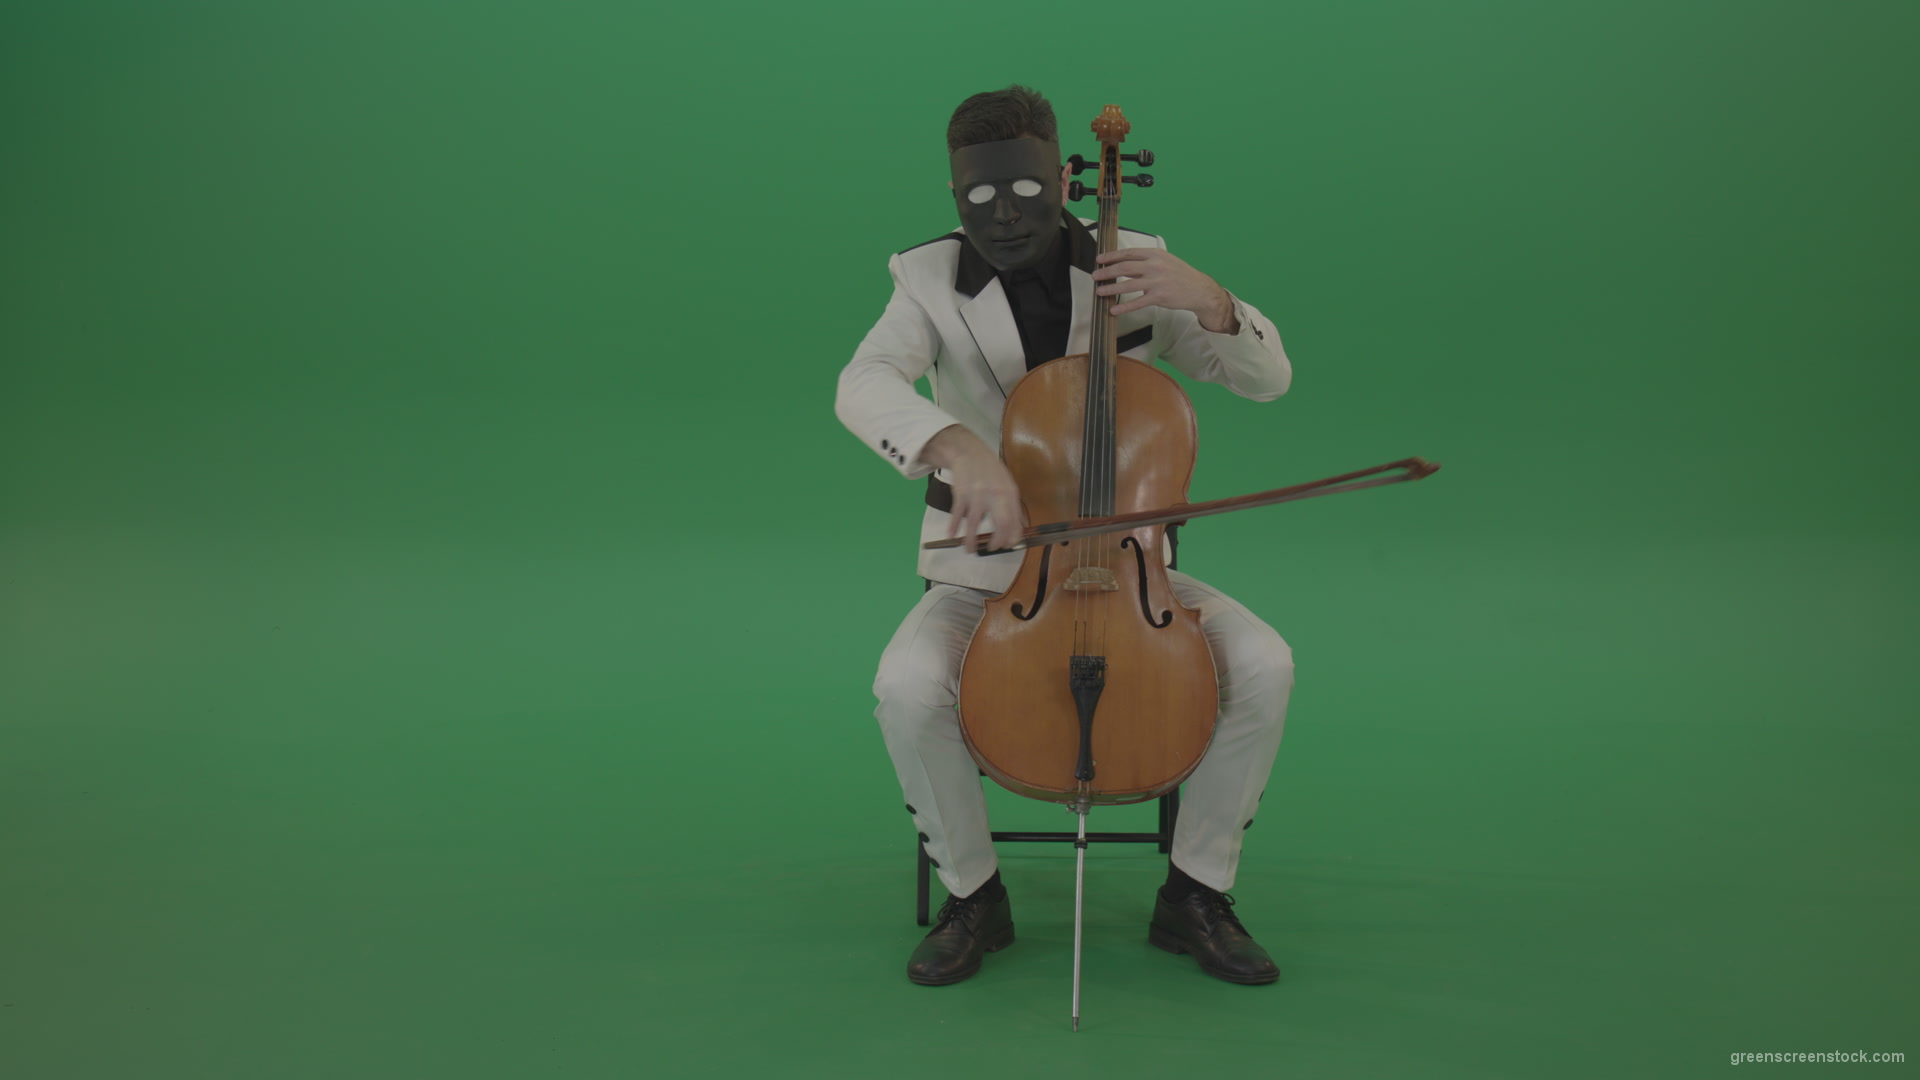 Man-plays-on-a-cello-in-a-white-suit-and-a-black-mask-with-white-eyes_004 Green Screen Stock